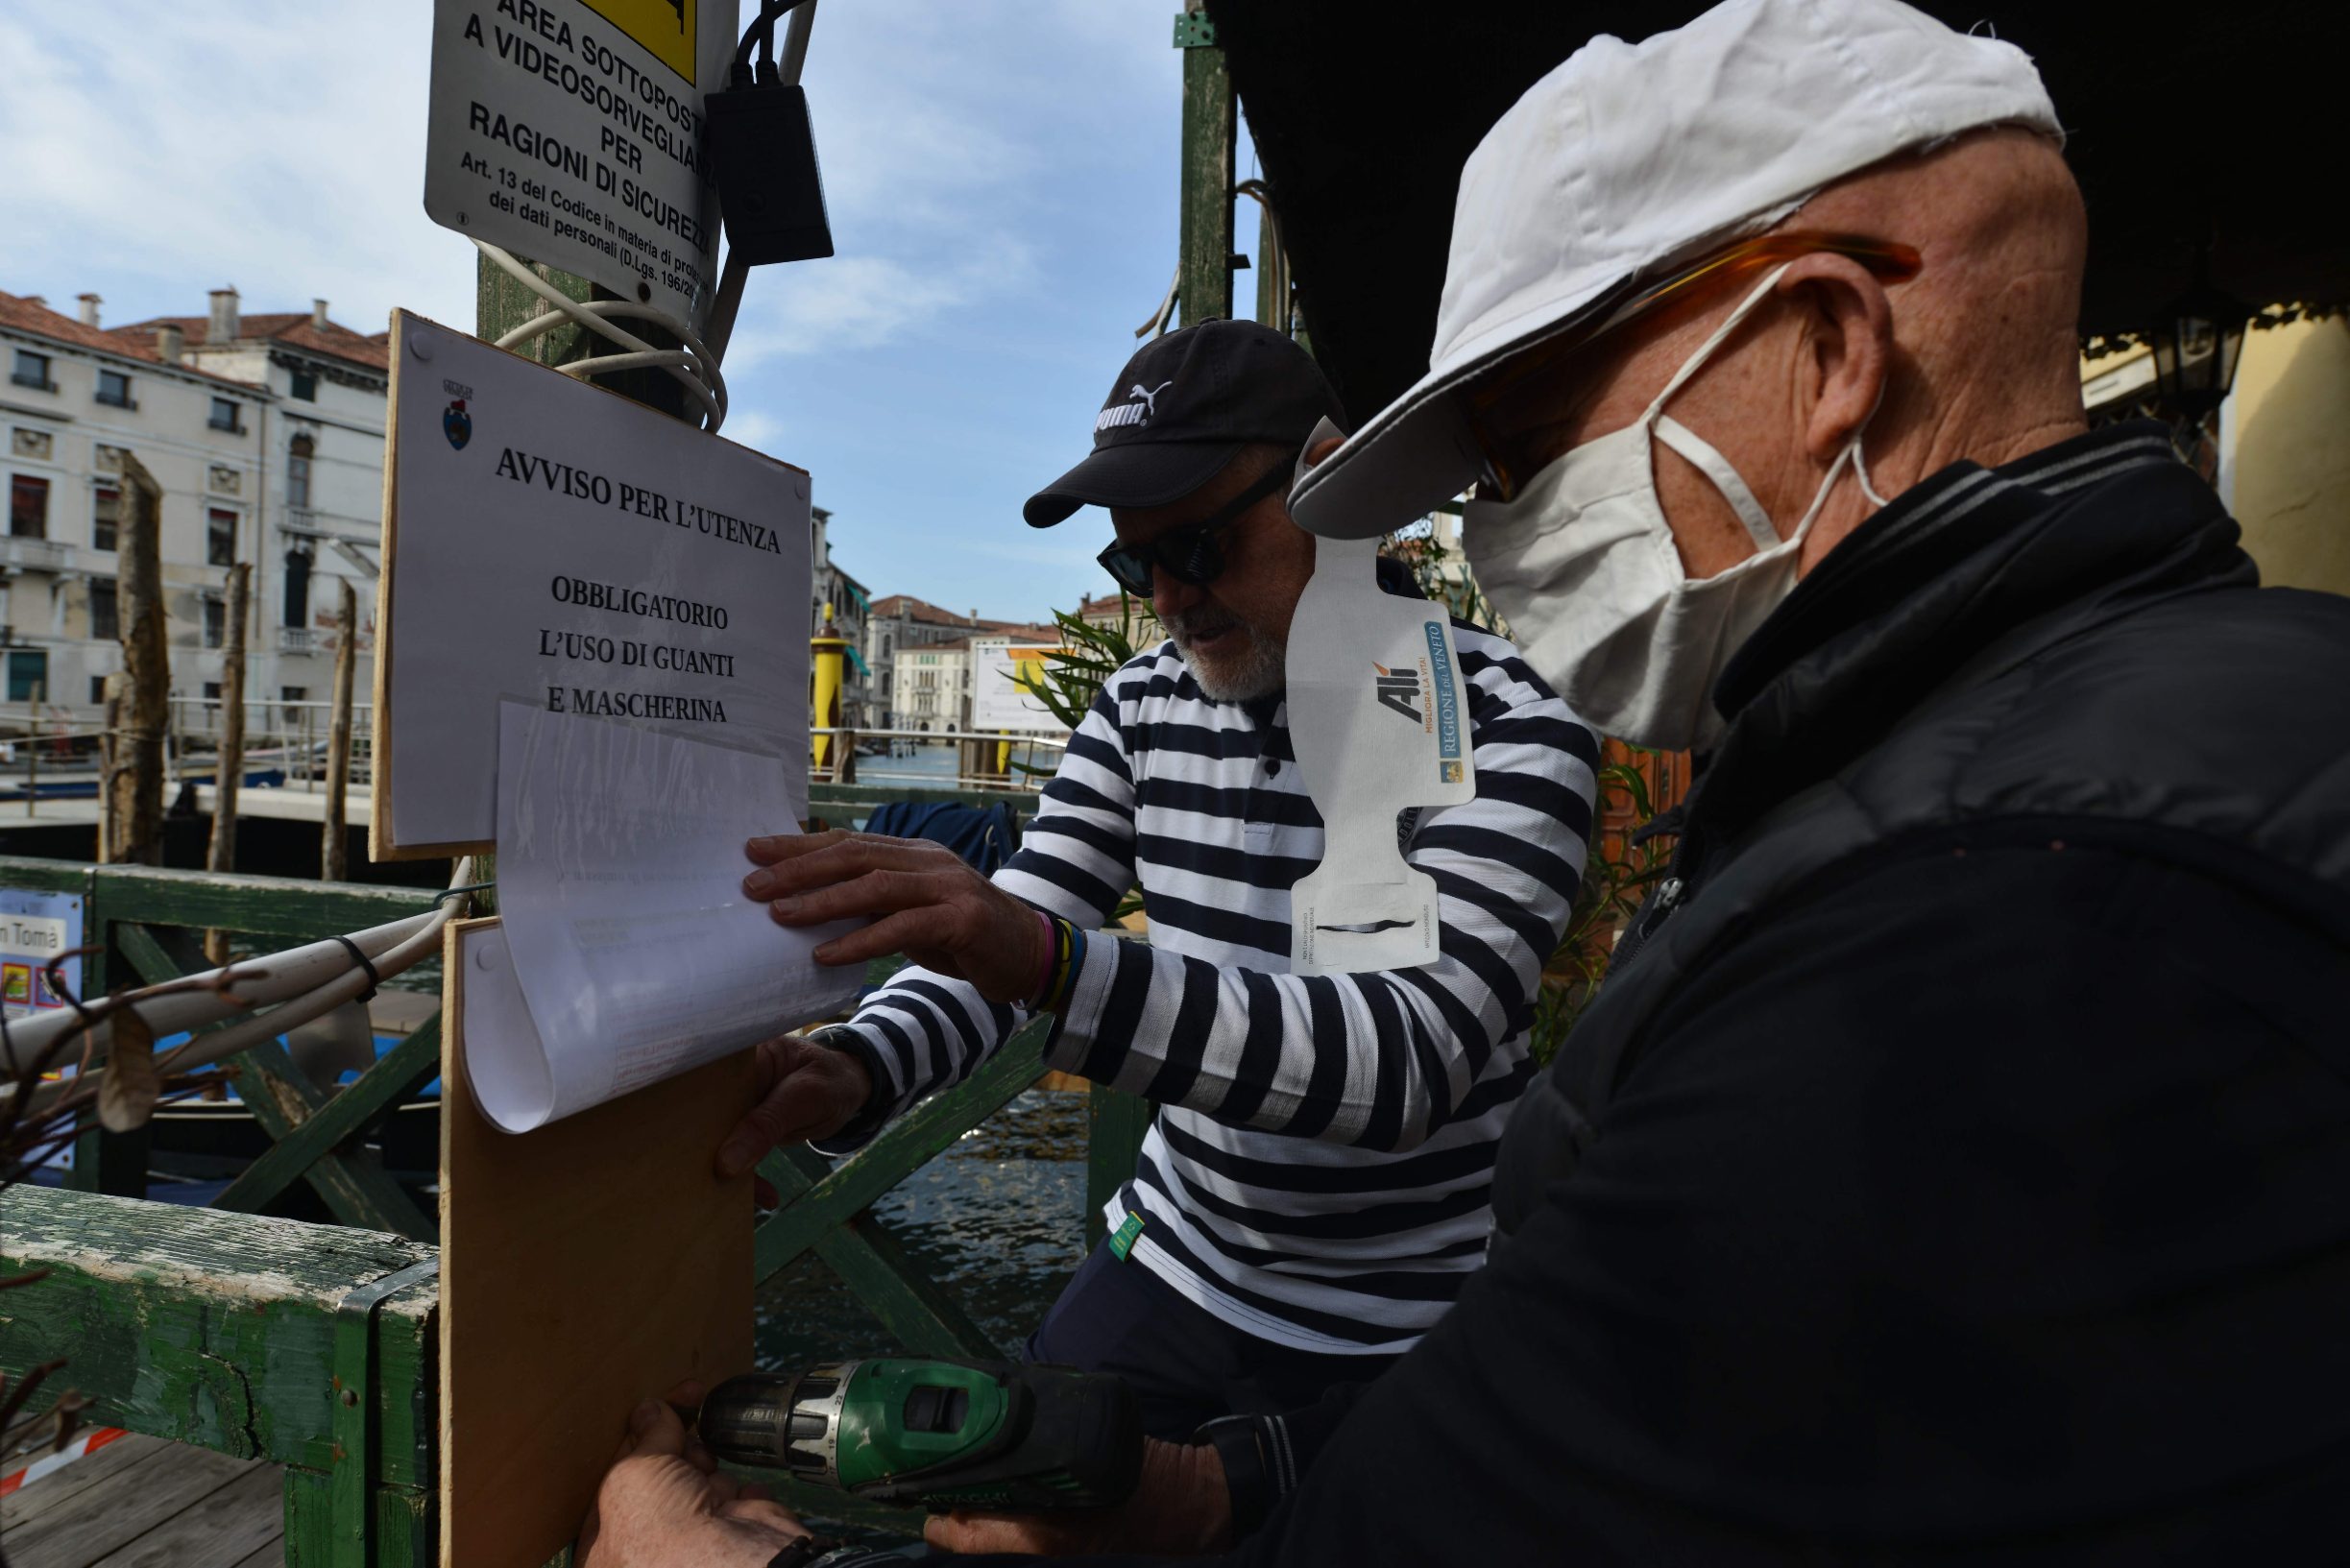 Gondoliers wearing a face mask resume service at the San Toma embankment on a Venice canal on May 18, 2020 during the country's lockdown aimed at curbing the spread of the COVID-19 infection, caused by the novel coronavirus. - Restaurants and churches reopen in Italy on May 18, 2020 as part of a fresh wave of lockdown easing in Europe and the country's latest step in a cautious, gradual return to normality, allowing businesses and churches to reopen after a two-month lockdown. (Photo by ANDREA PATTARO / AFP)